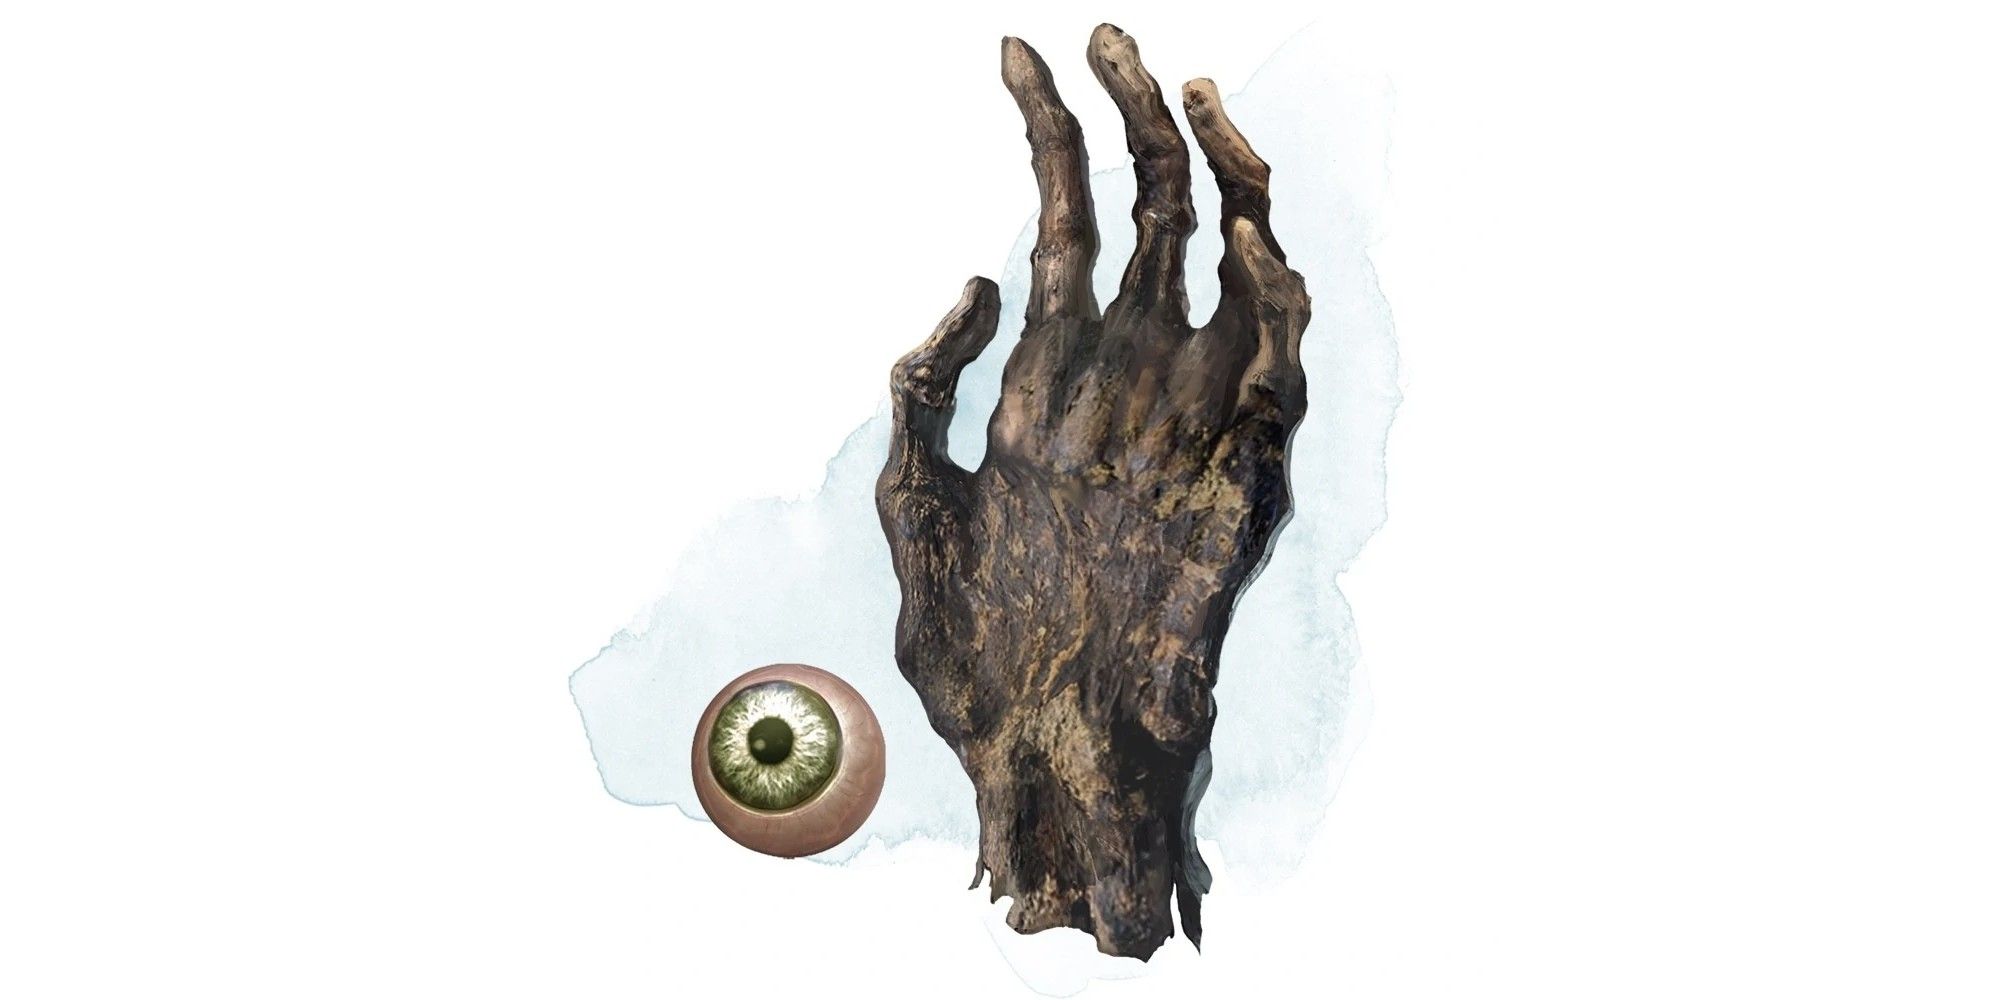 D&D Hand and Eye of Vecna, the eye has green surrounding the pupil, the hand is incredibly shriveled.